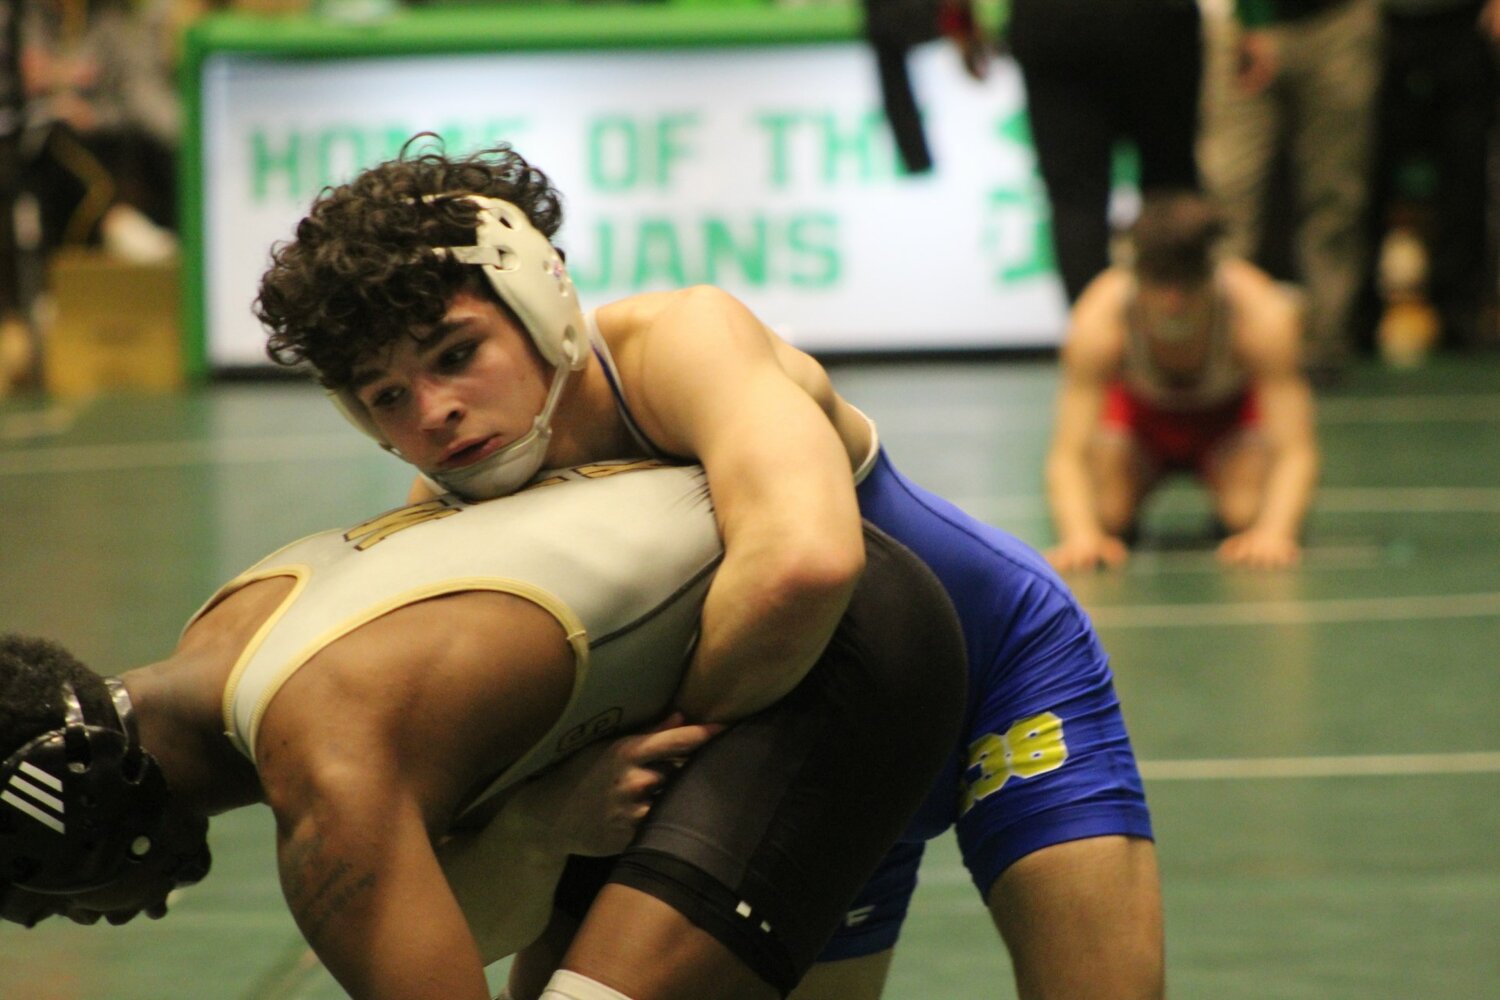 Crawfordsville junior Landon Vaught ended his junior season in the ticket round at 138 lbs.